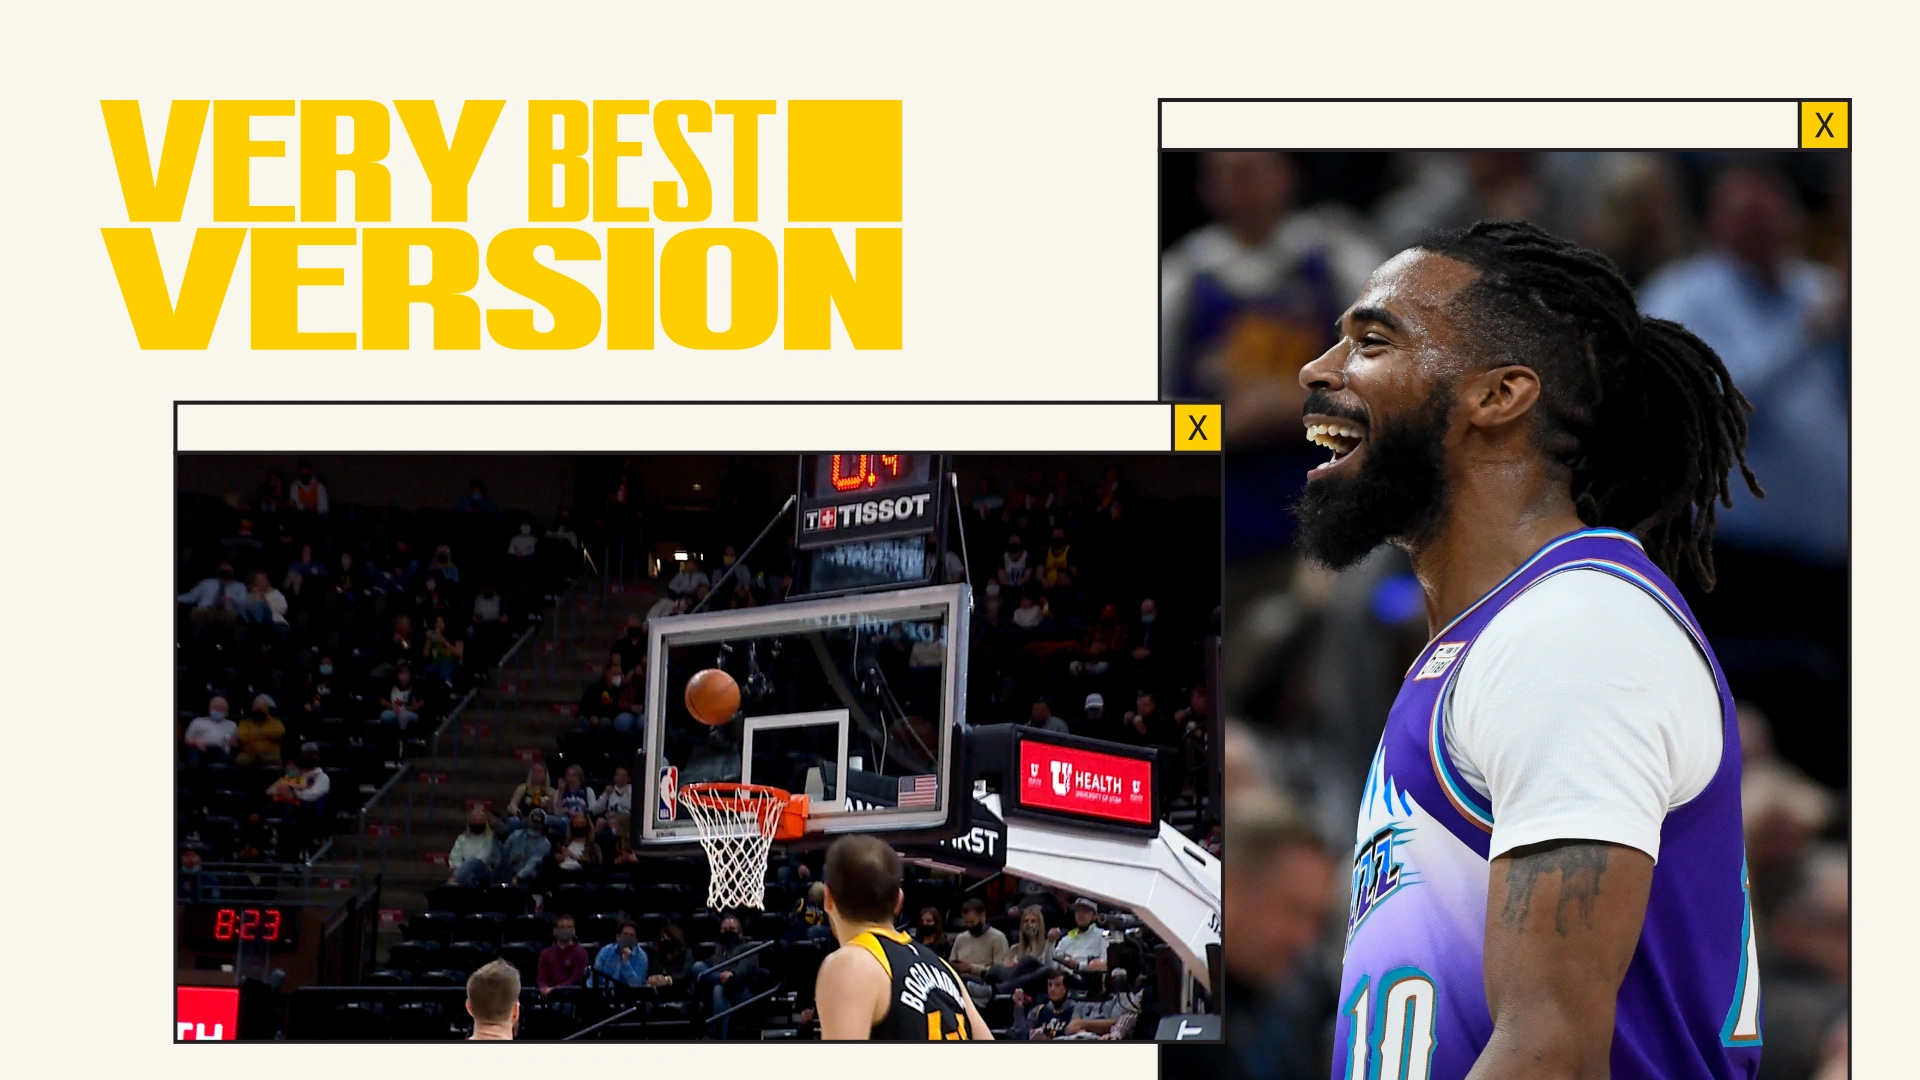 Mike Conley photography with typography composition saying "Very best version".